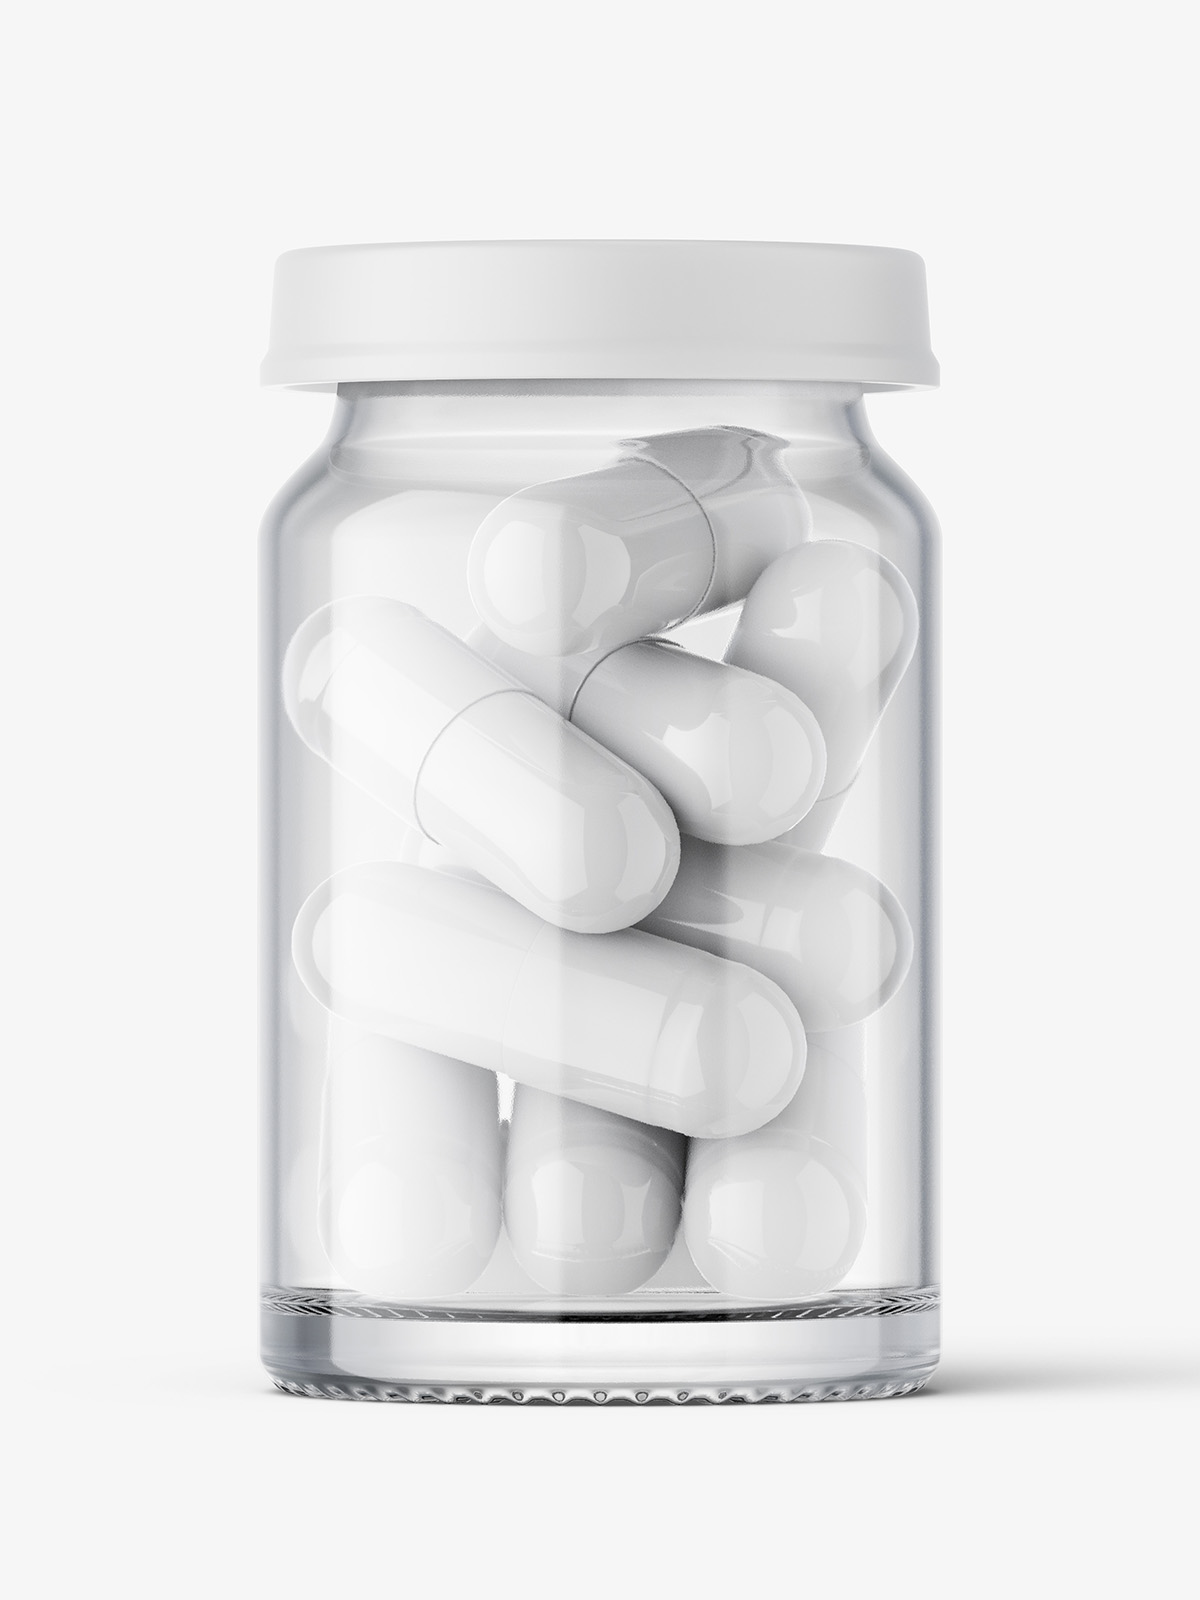 Download Small jar with capsules mockup - Smarty Mockups